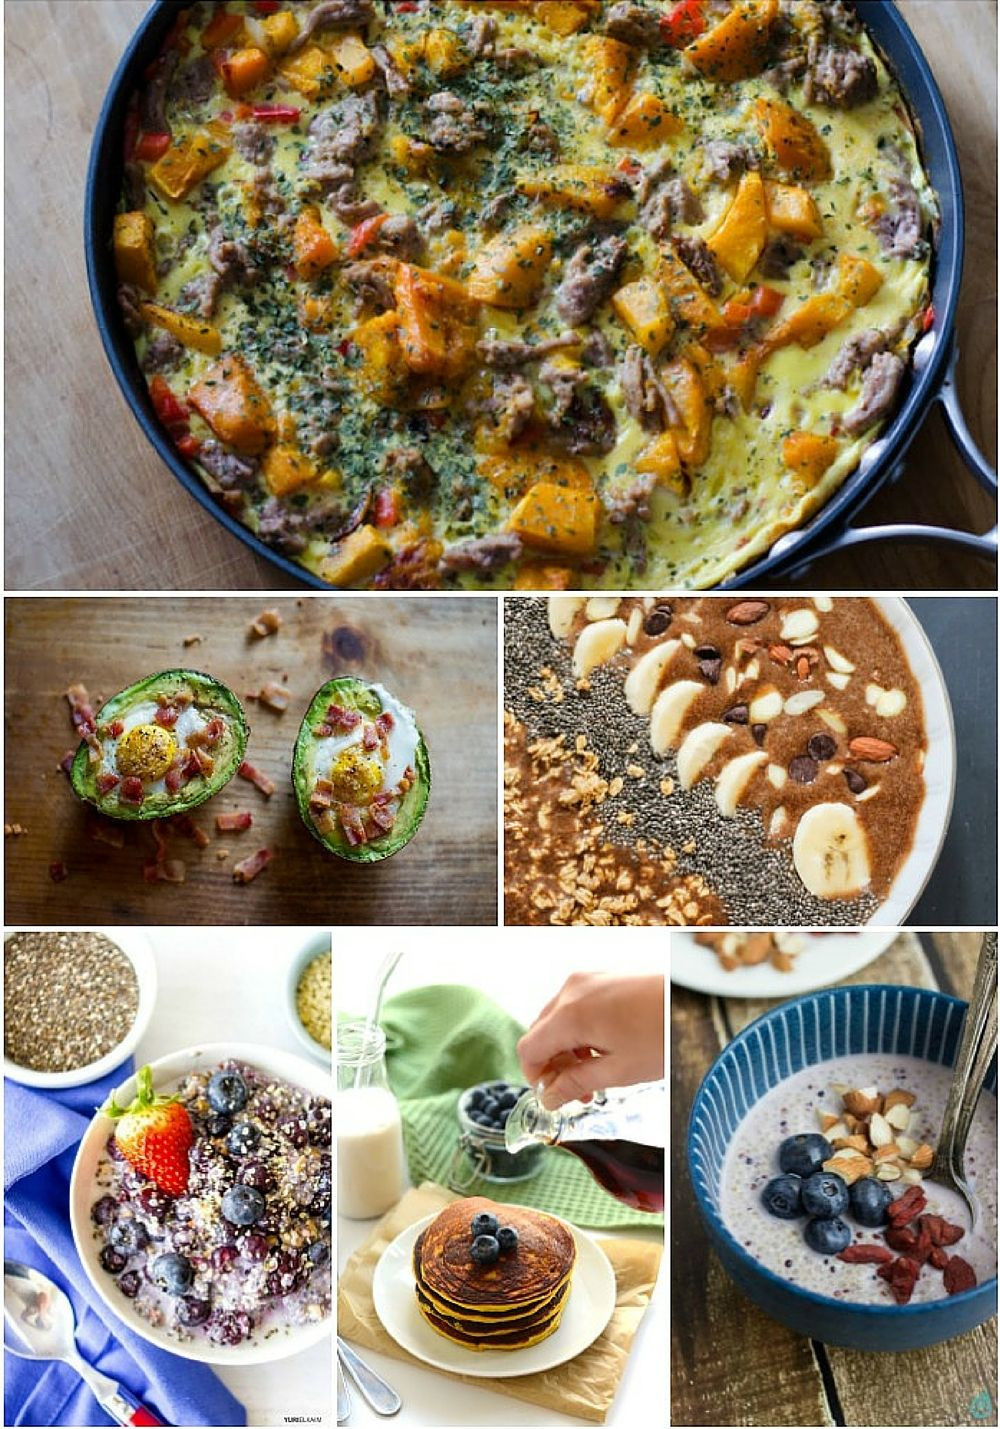 Healthy High Protein Breakfast
 21 Healthy High Protein Breakfasts You Need to Make